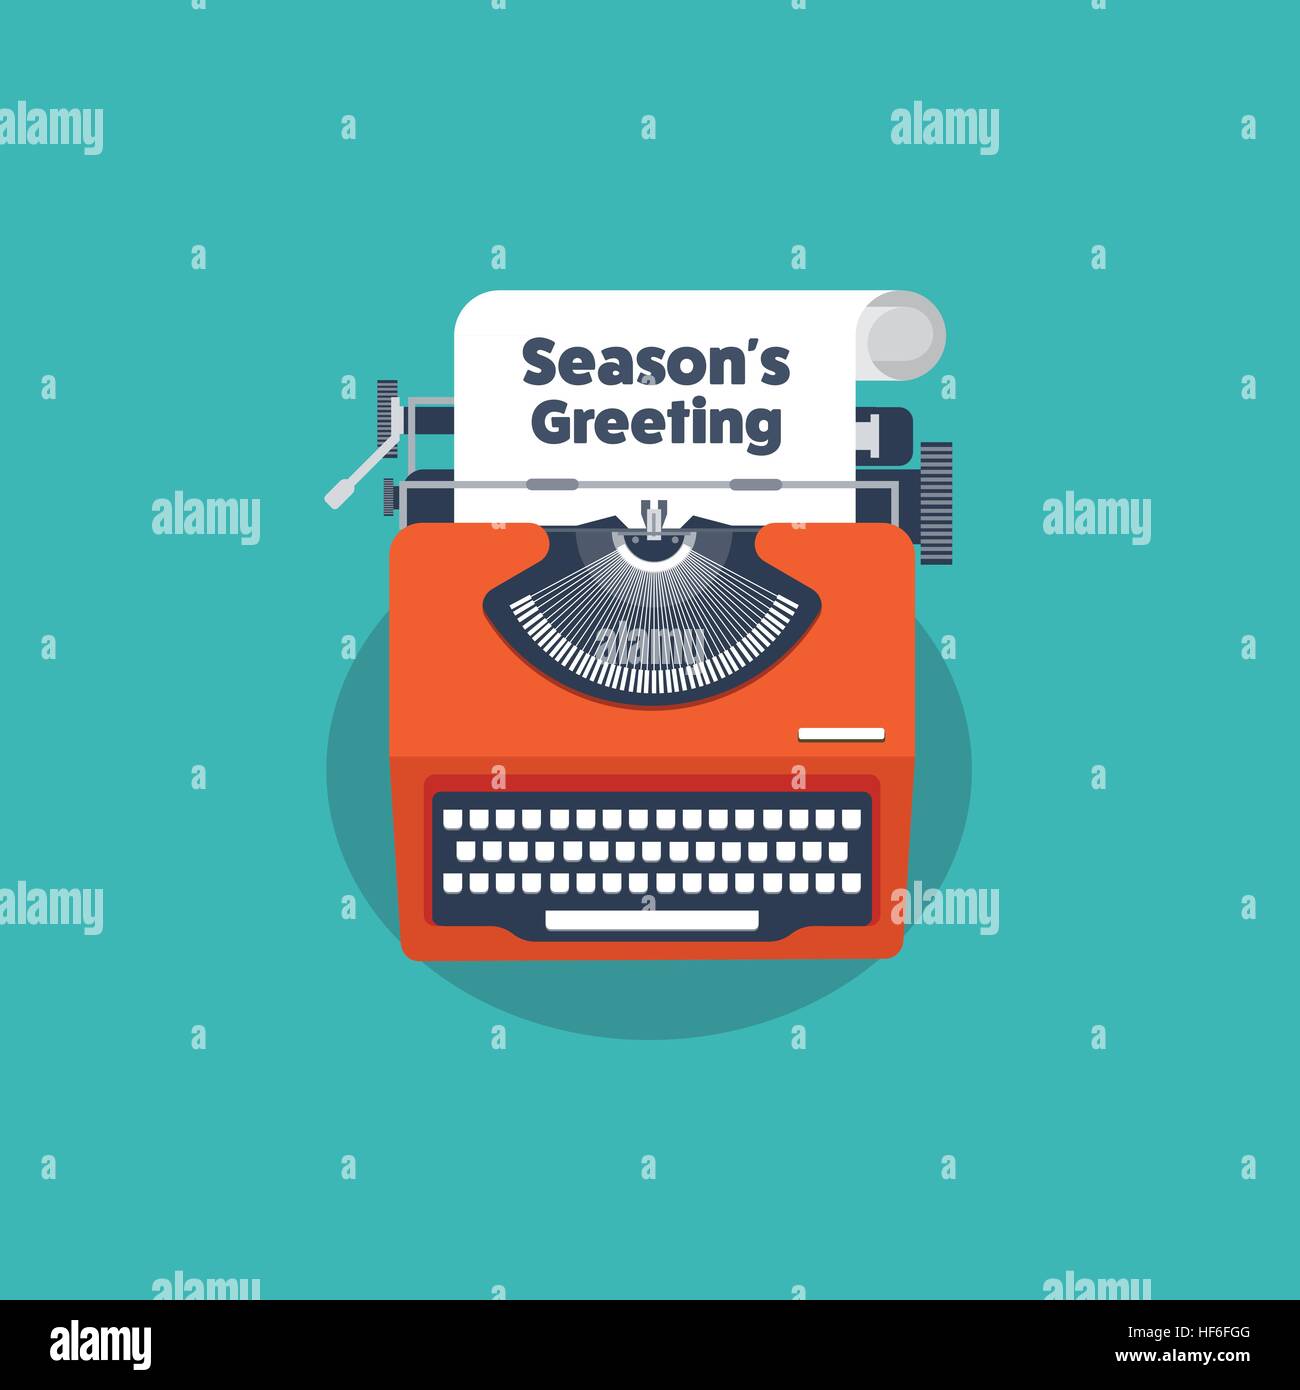 Typewriter in a flat style. Christmas wish list. Seasons greeting. New year. 2017. December holidays. Stock Vector